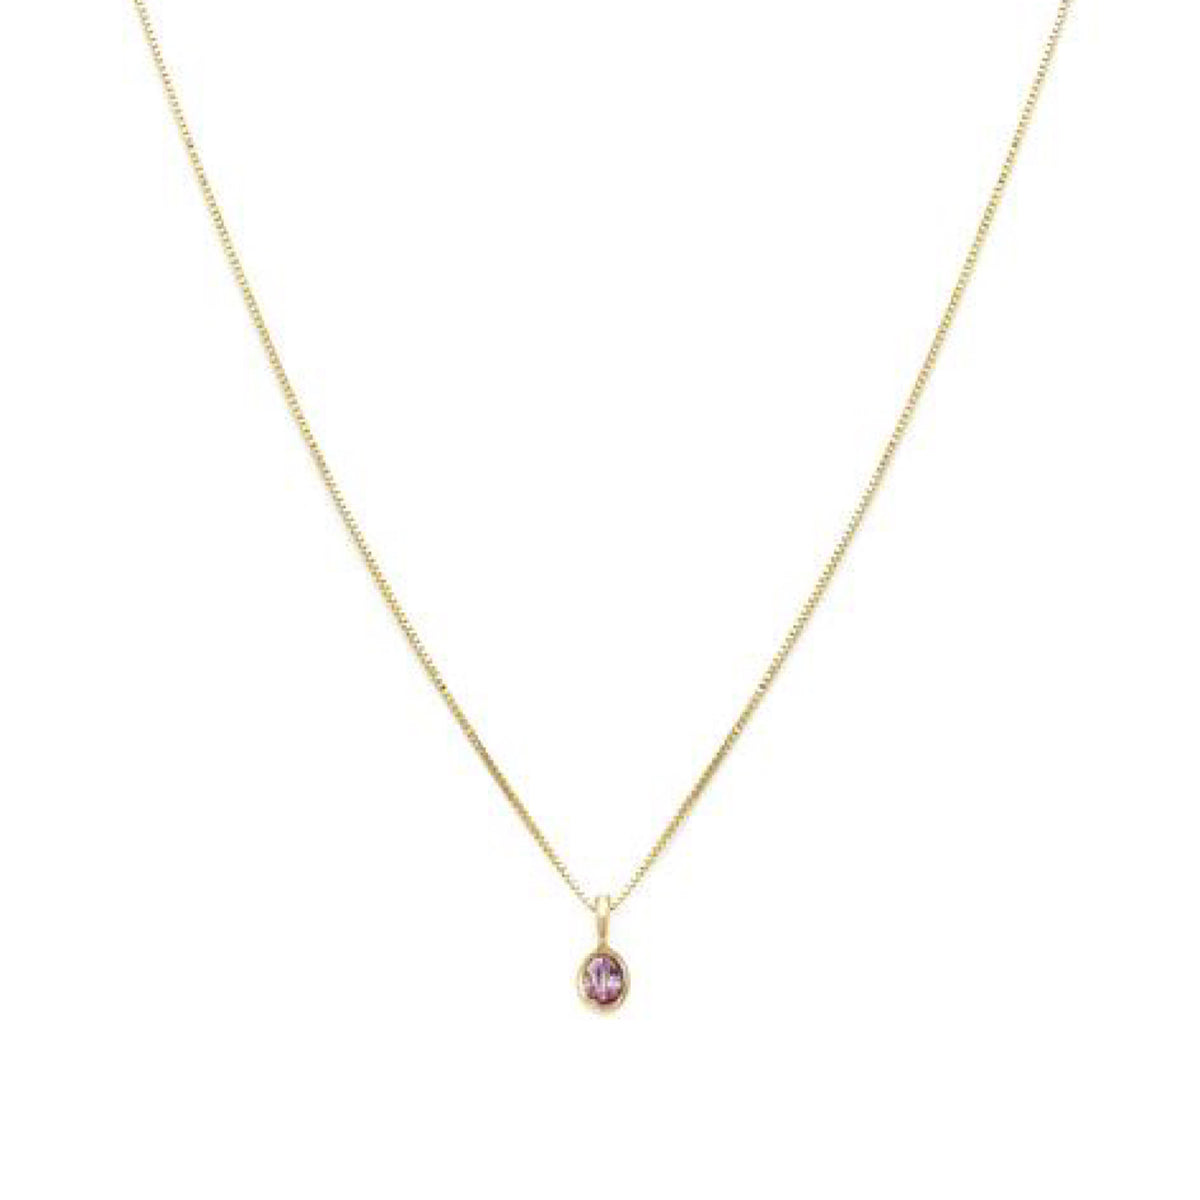 10K Petite Oval Necklace, Pink Sapphire